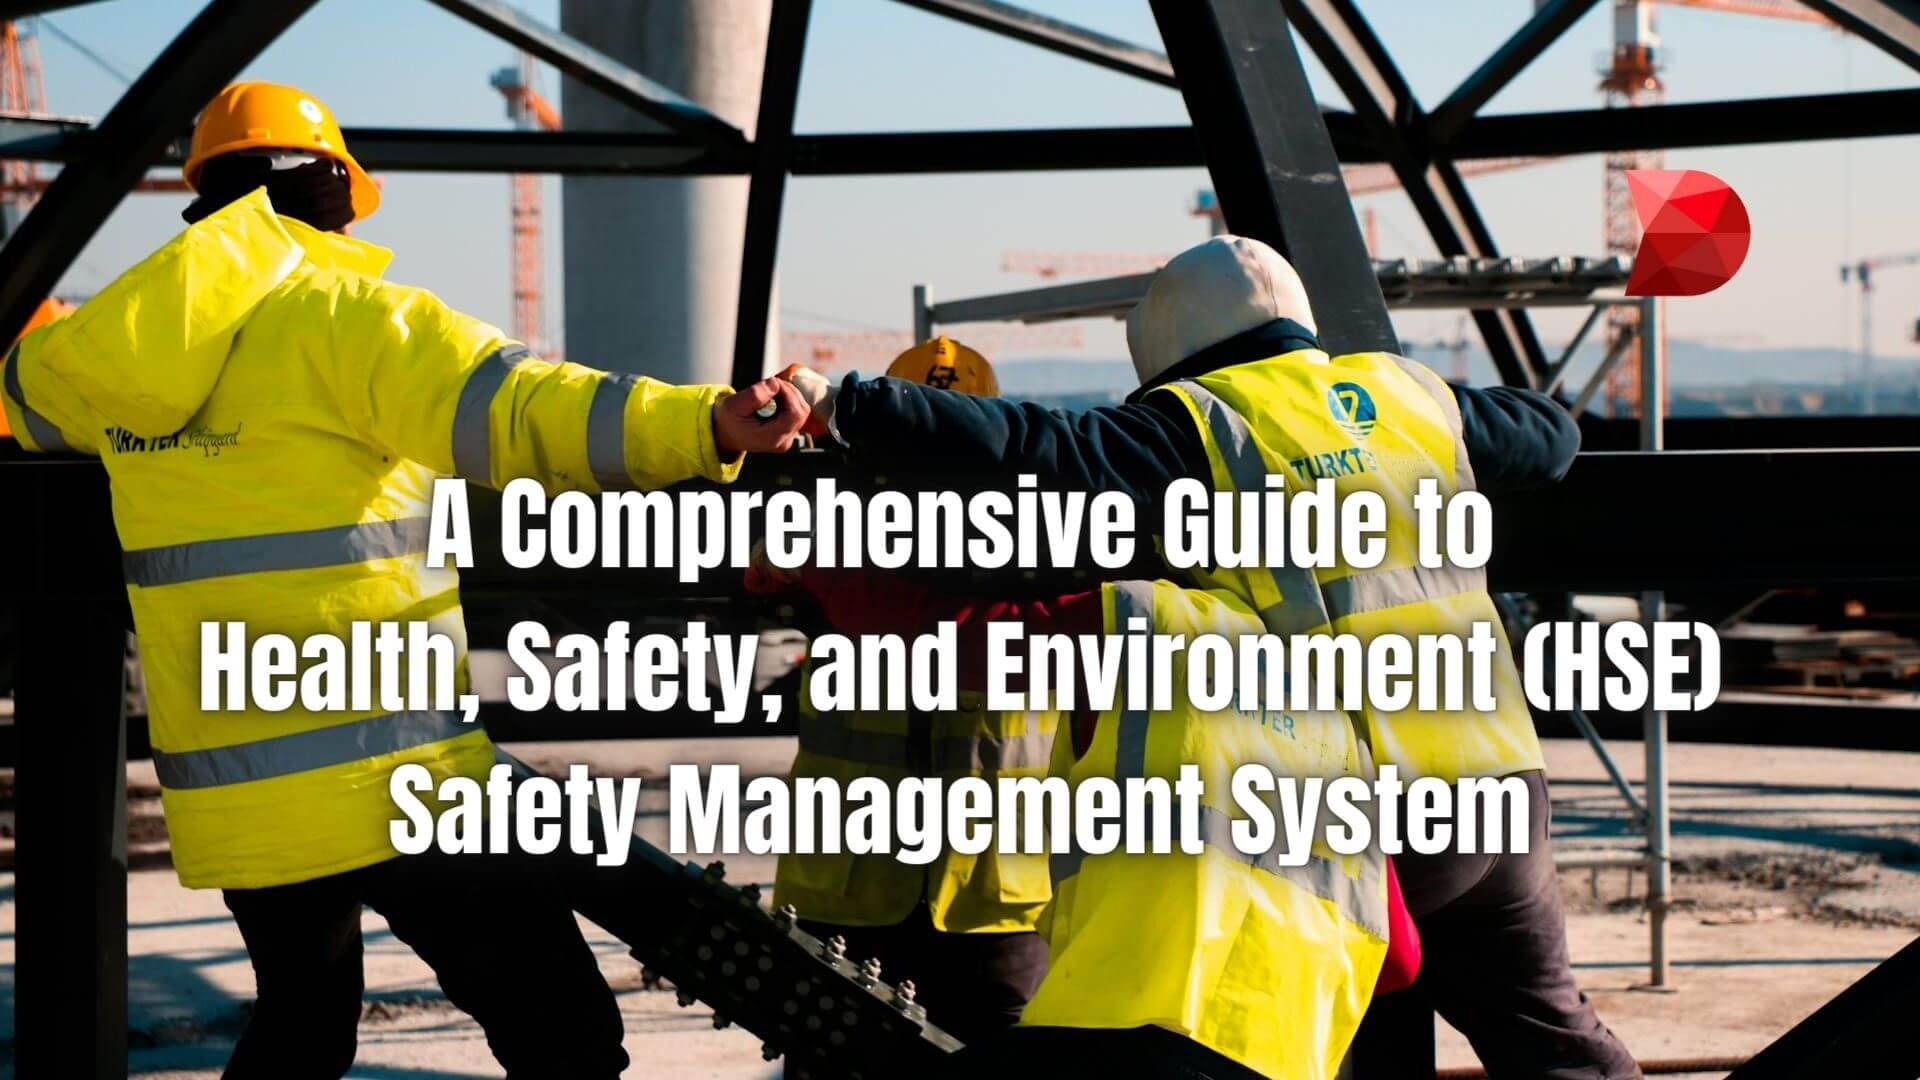 Ensure health, safety, and environmental compliance effortlessly! Unlock the keys to an effective HSE management system with our guide.